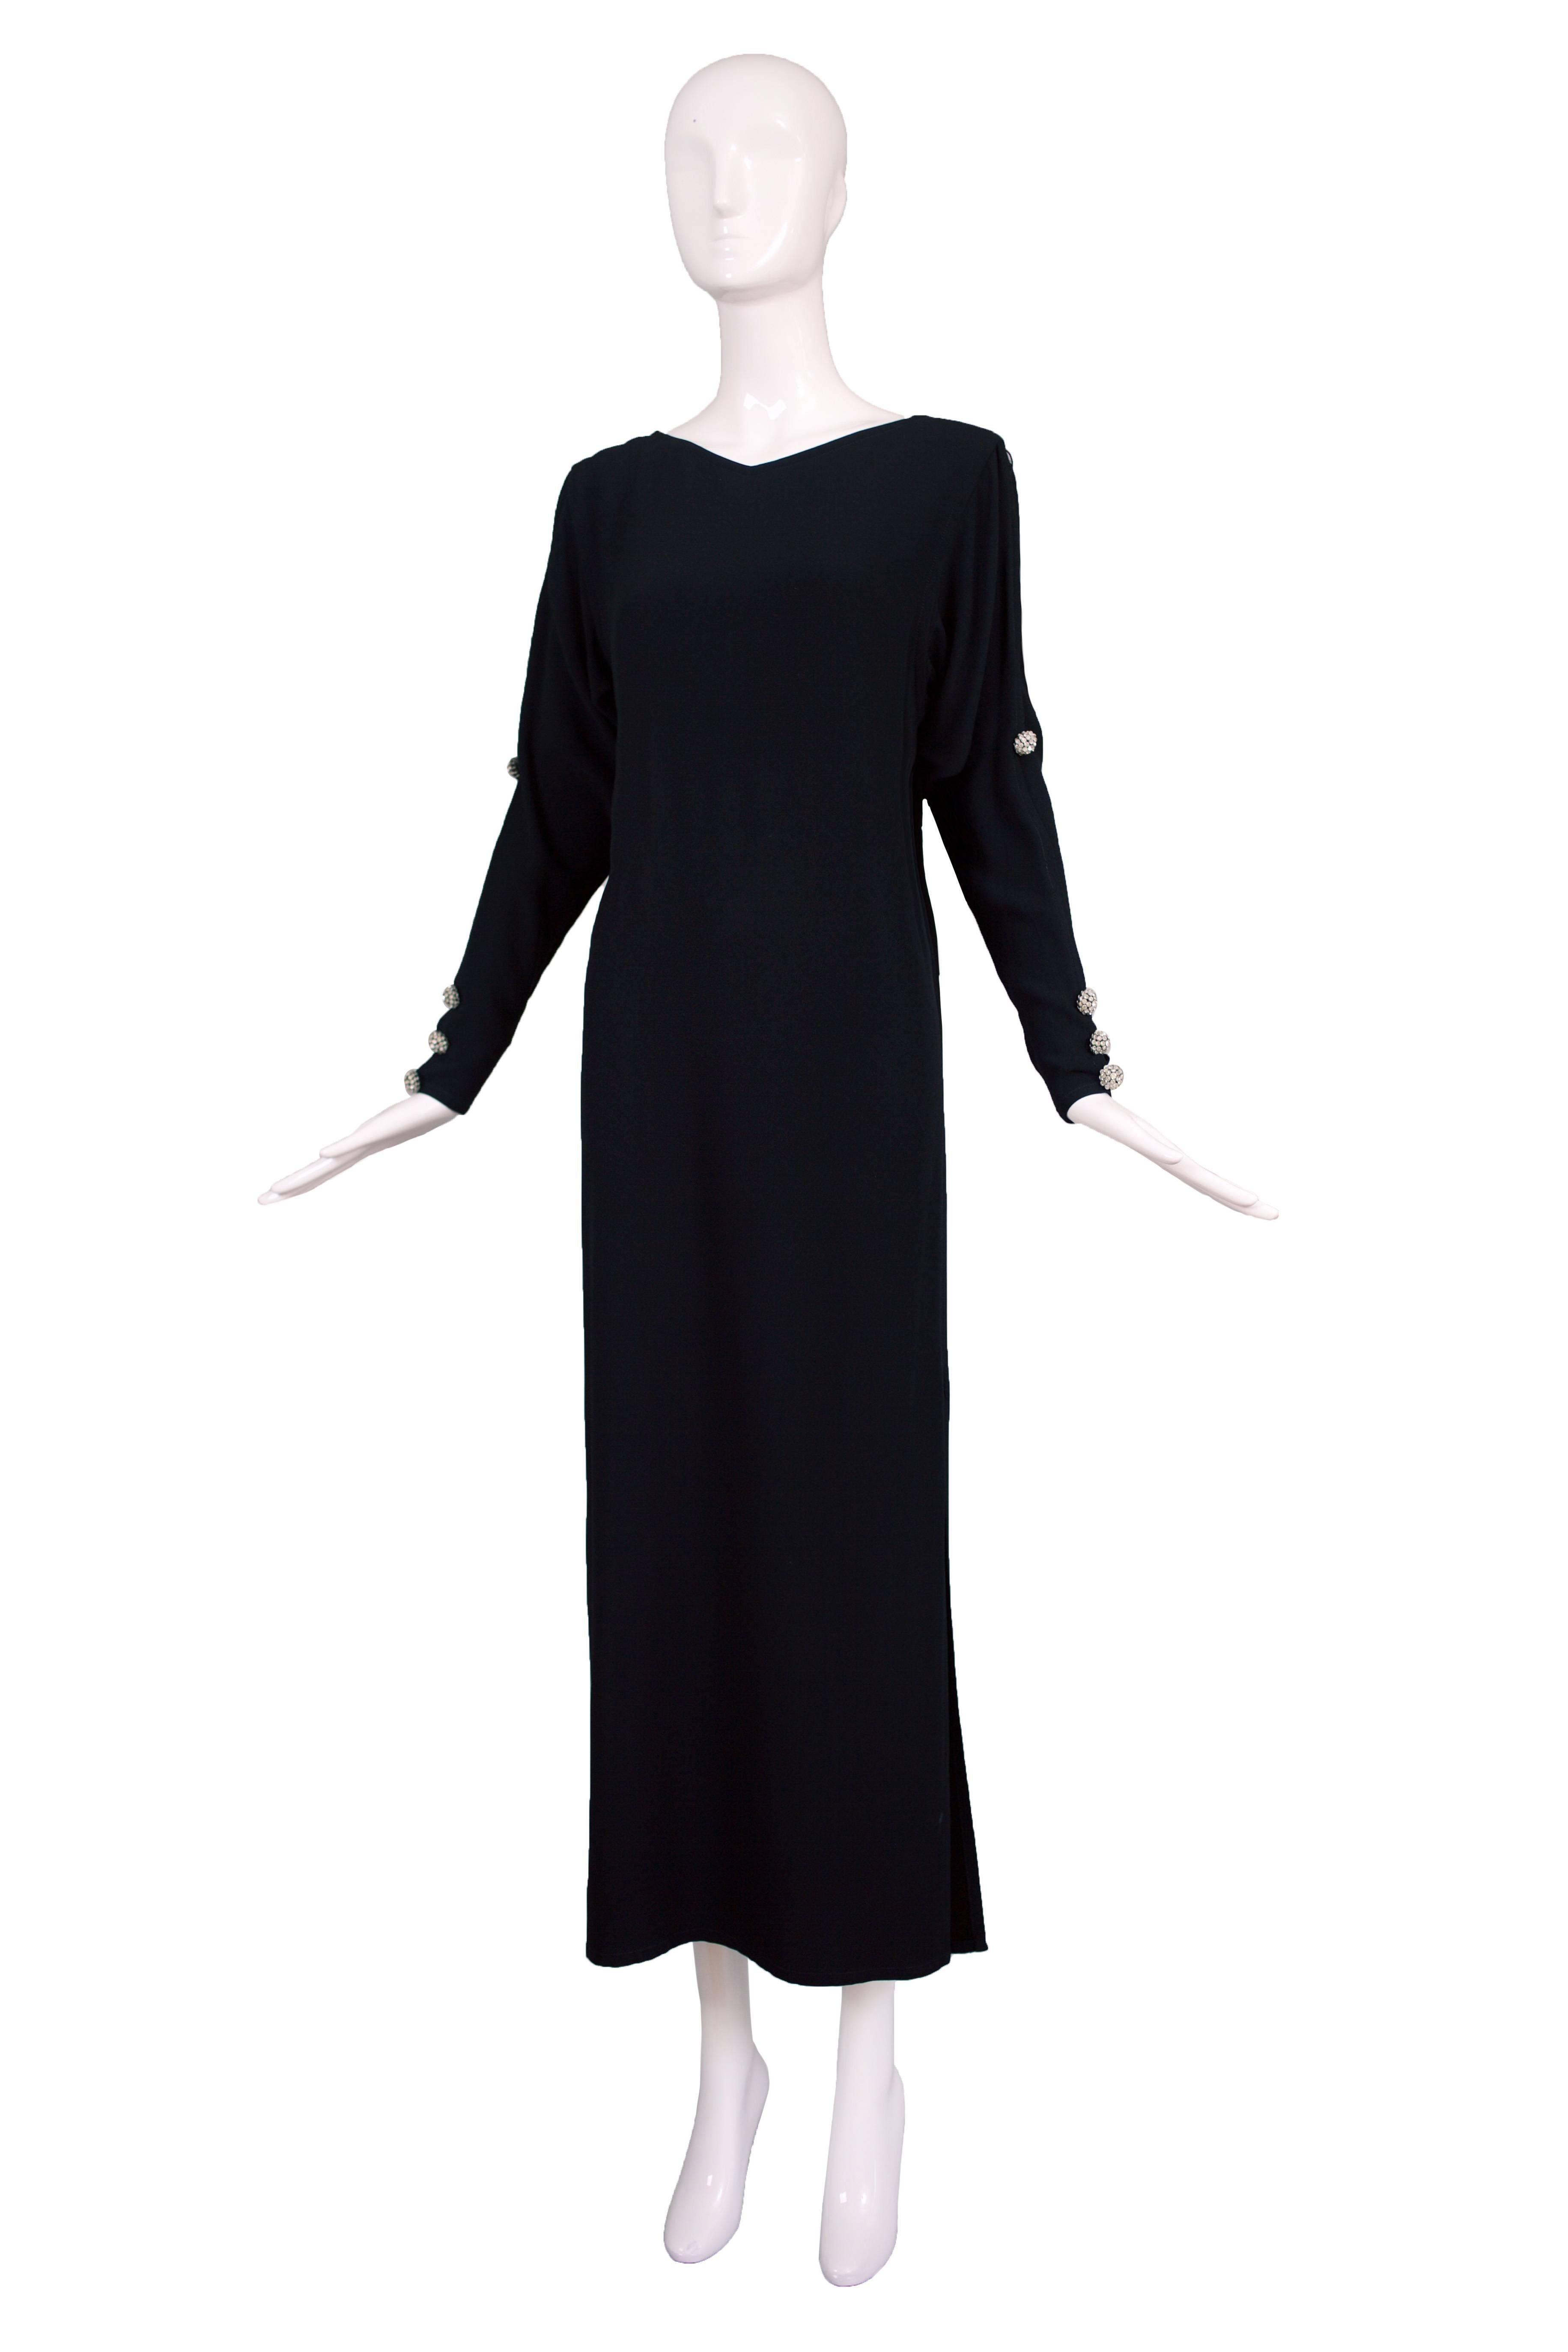 Late 1970's/early 80's Yves Saint Laurent black silk crepe evening gown with long sleeves, slits up both sides and decorative crystal buttons at the arms and sleeves. In excellent condition. Tag size 42. Please consult measurements.